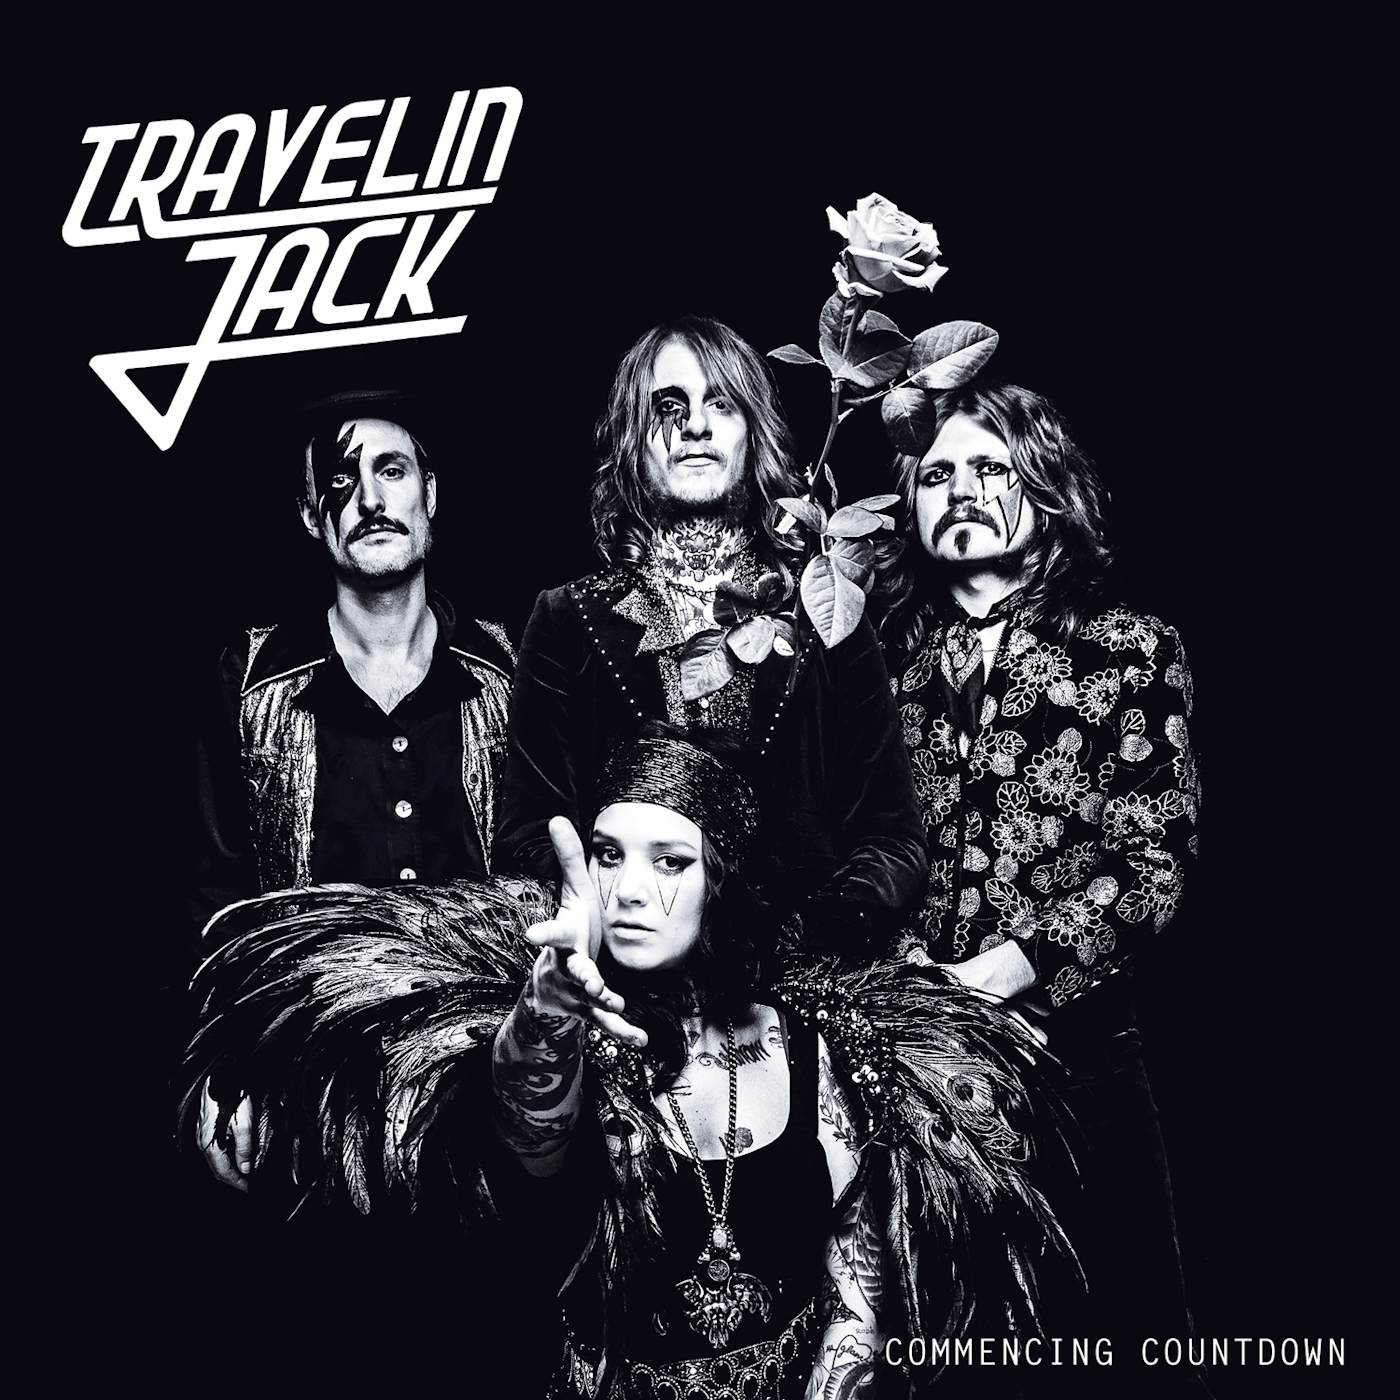 Travelin Jack COMMENCING COUNTDOWN CD